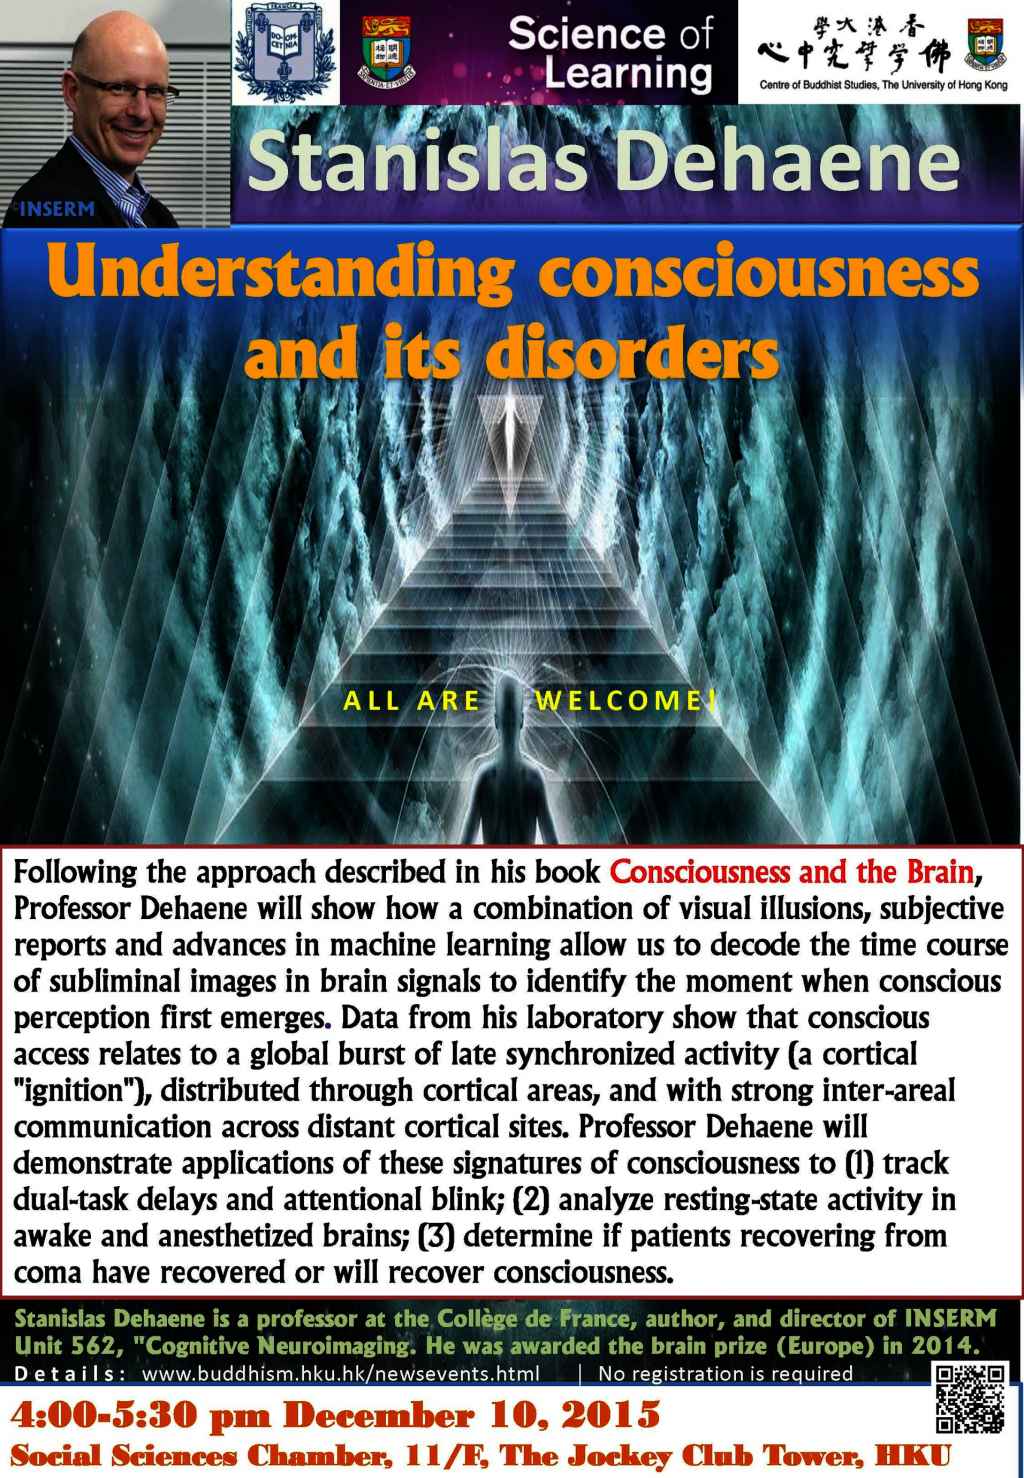 Public Lecture by Professor Stanislas Dehaene  - Understanding consciousness and its disorders